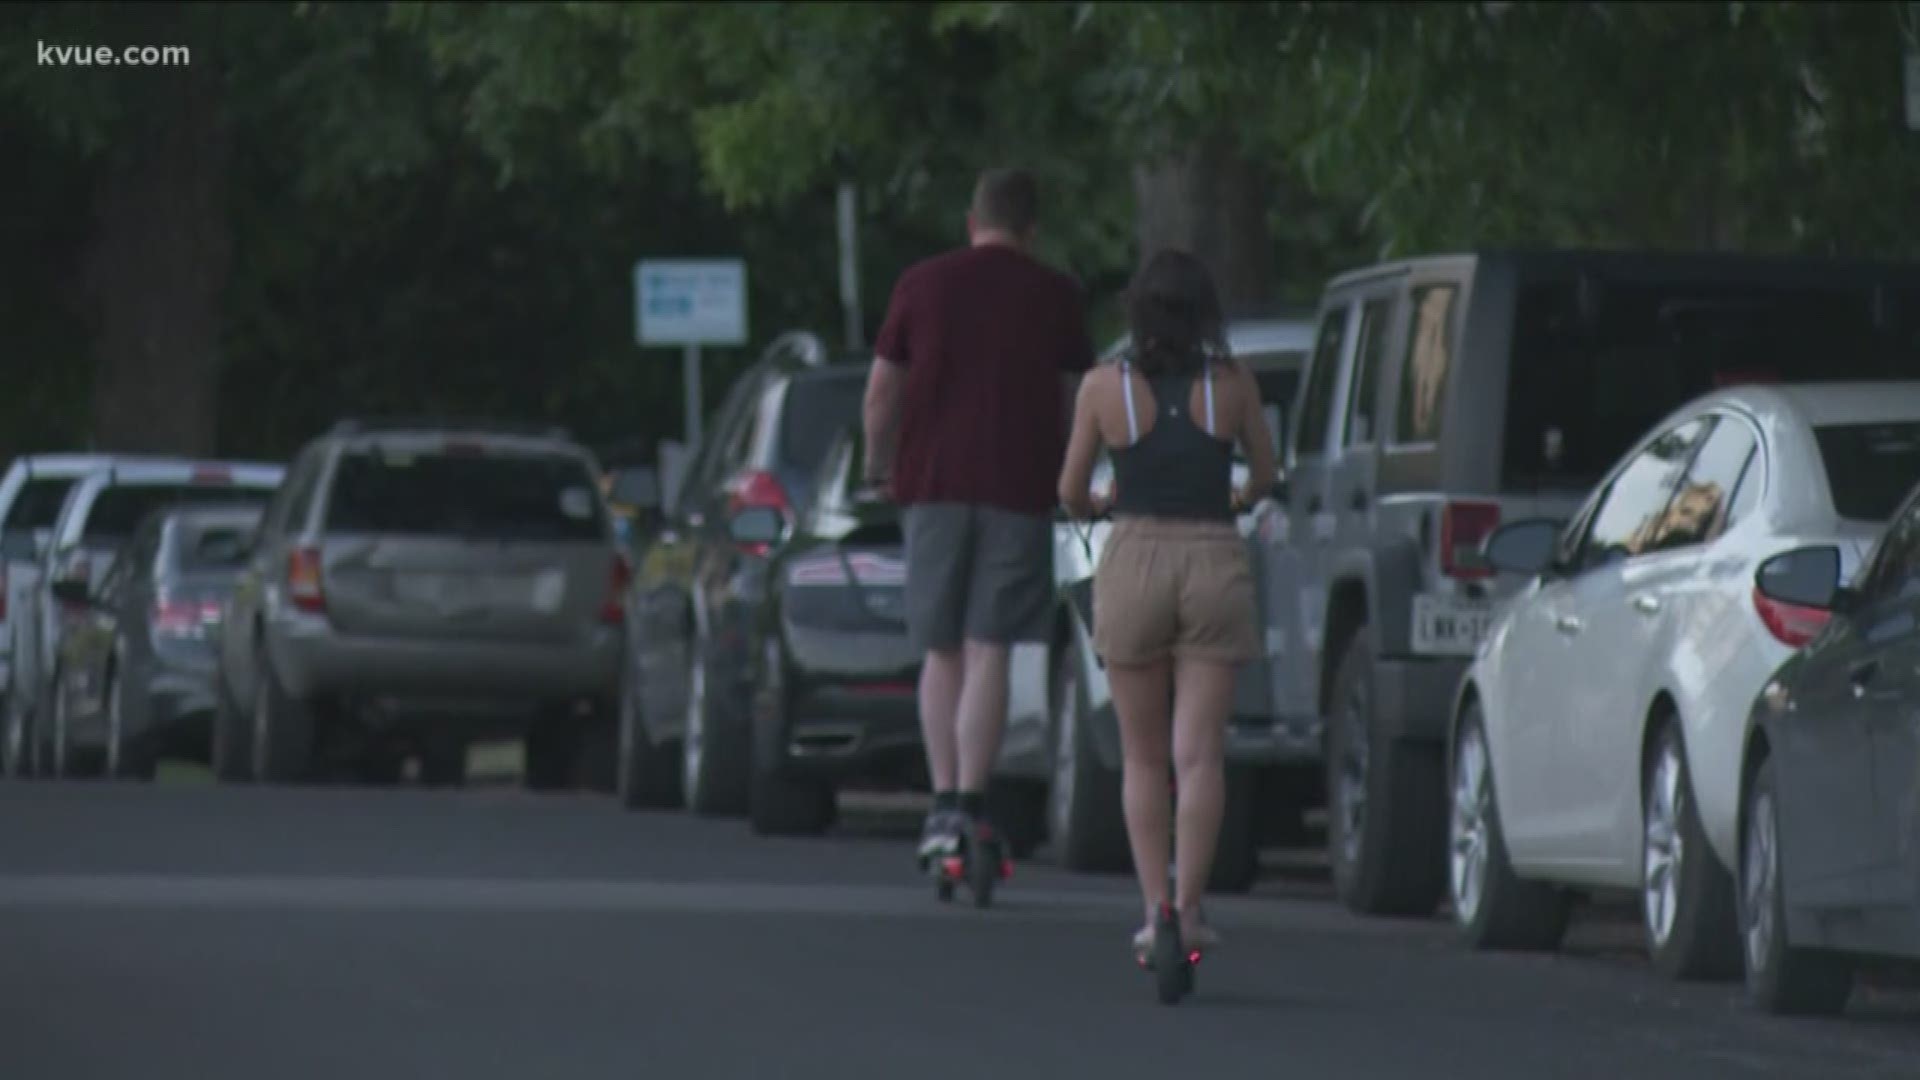 Rainey Street has gotten so popular and grown so fast that many who live near the area say it's not safe.